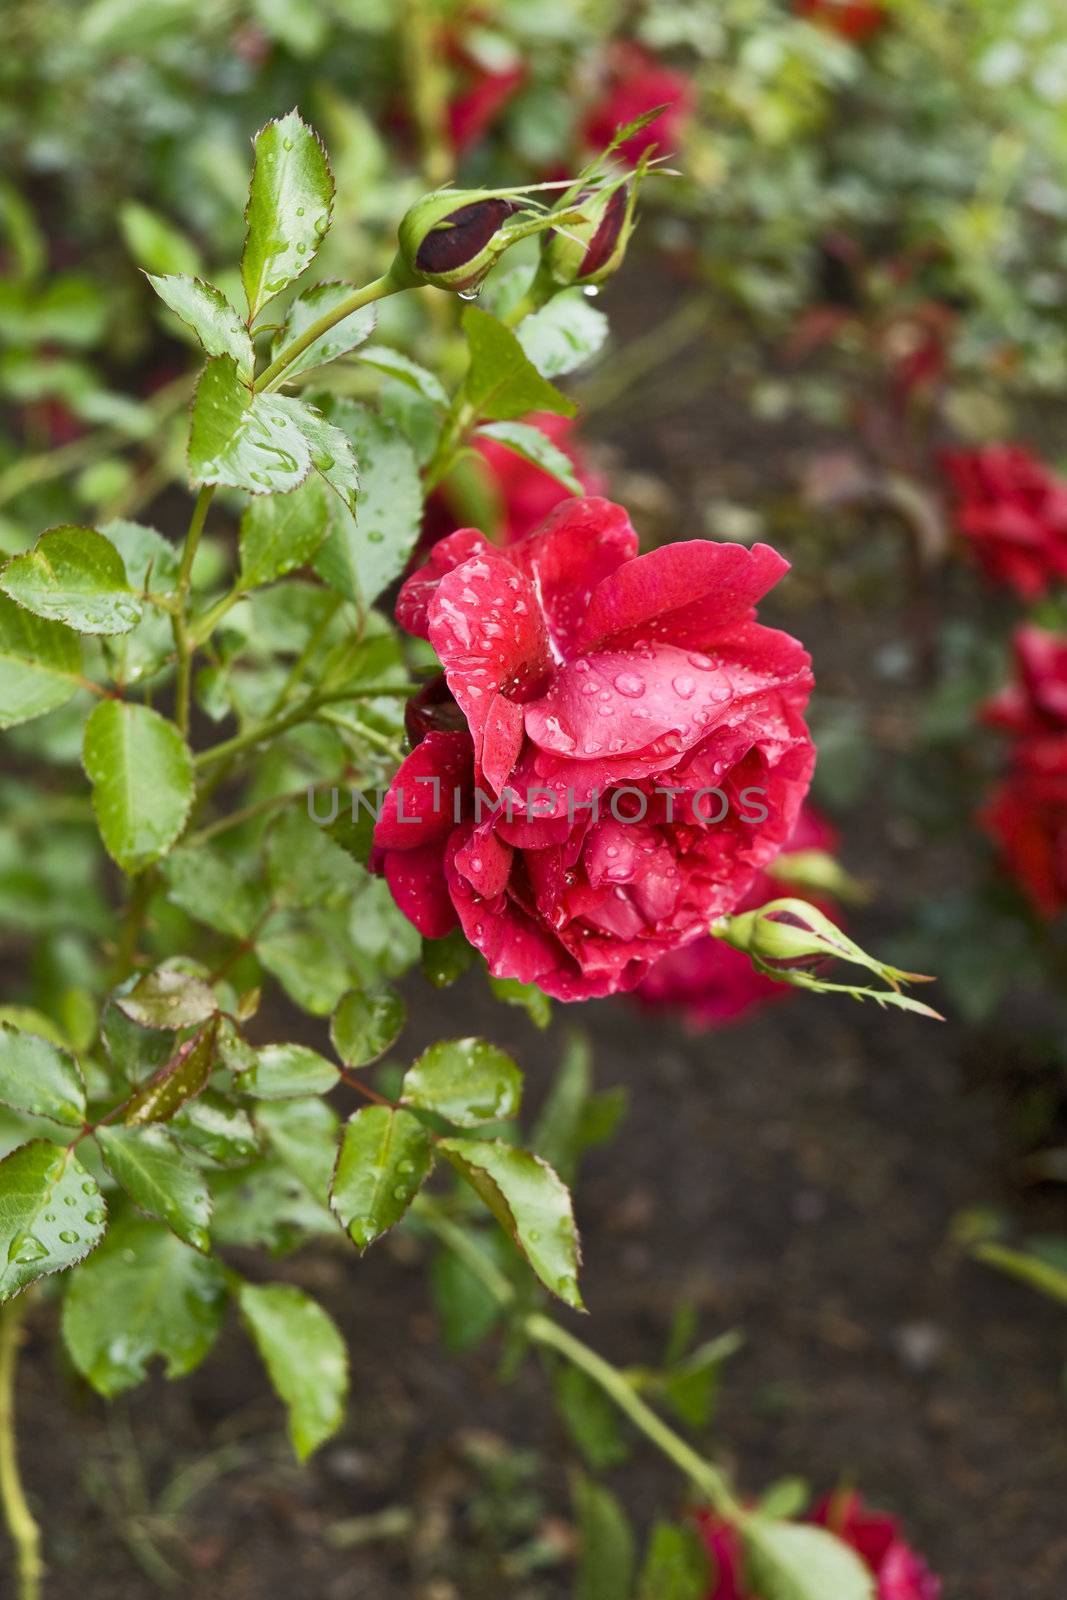 Crimson rose after rain with water drops